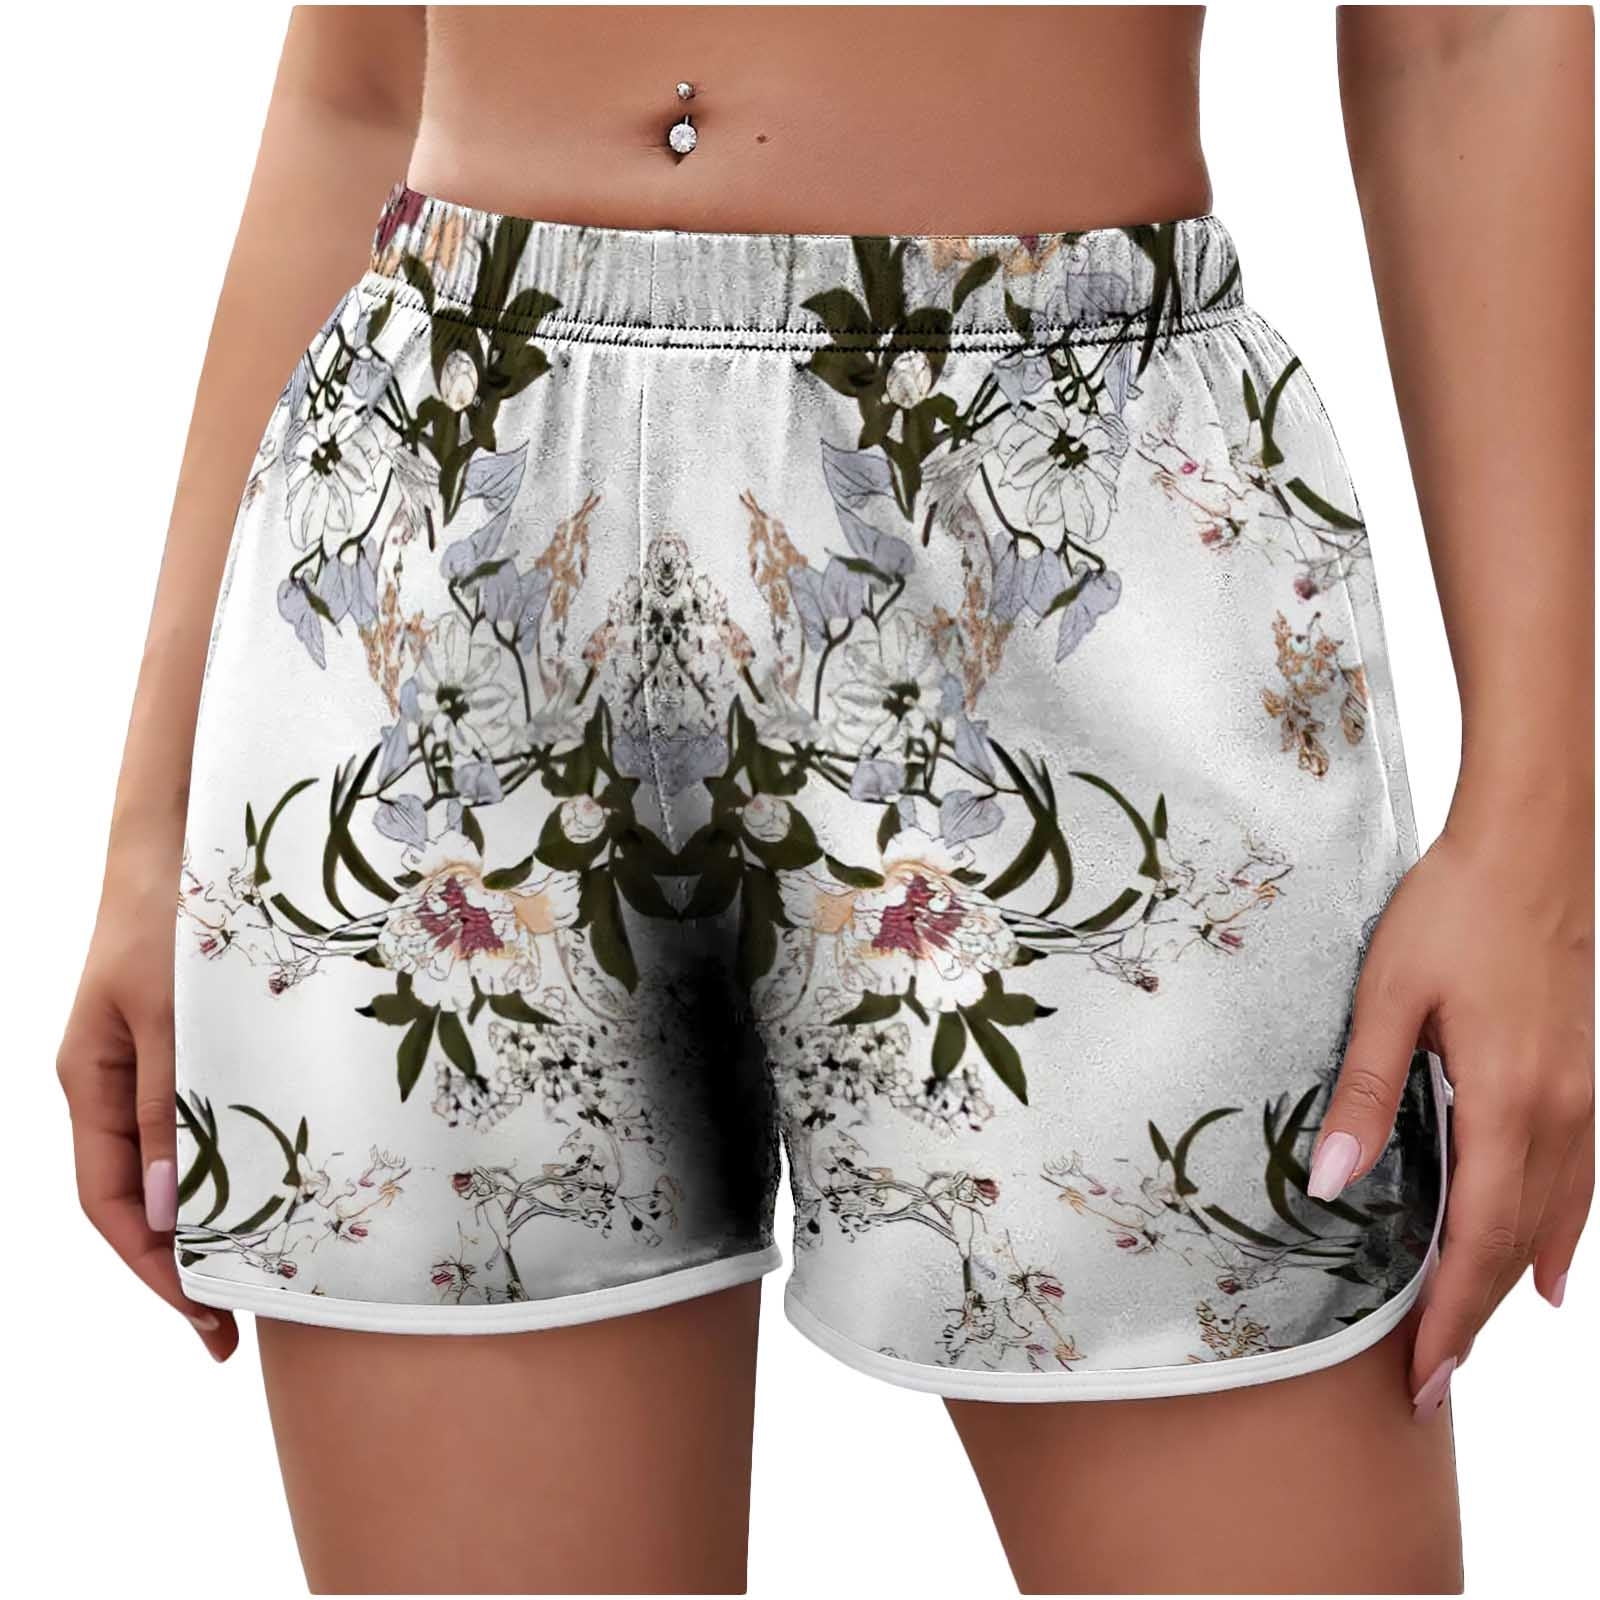 Shorts for Women, Women'S Lightweight Summer Casual Elastic Waist Print  Shorts Baggy Comfy Beach Shorts Lightning Deals Of Today Prime By Hour  Pallets For Sale #2 